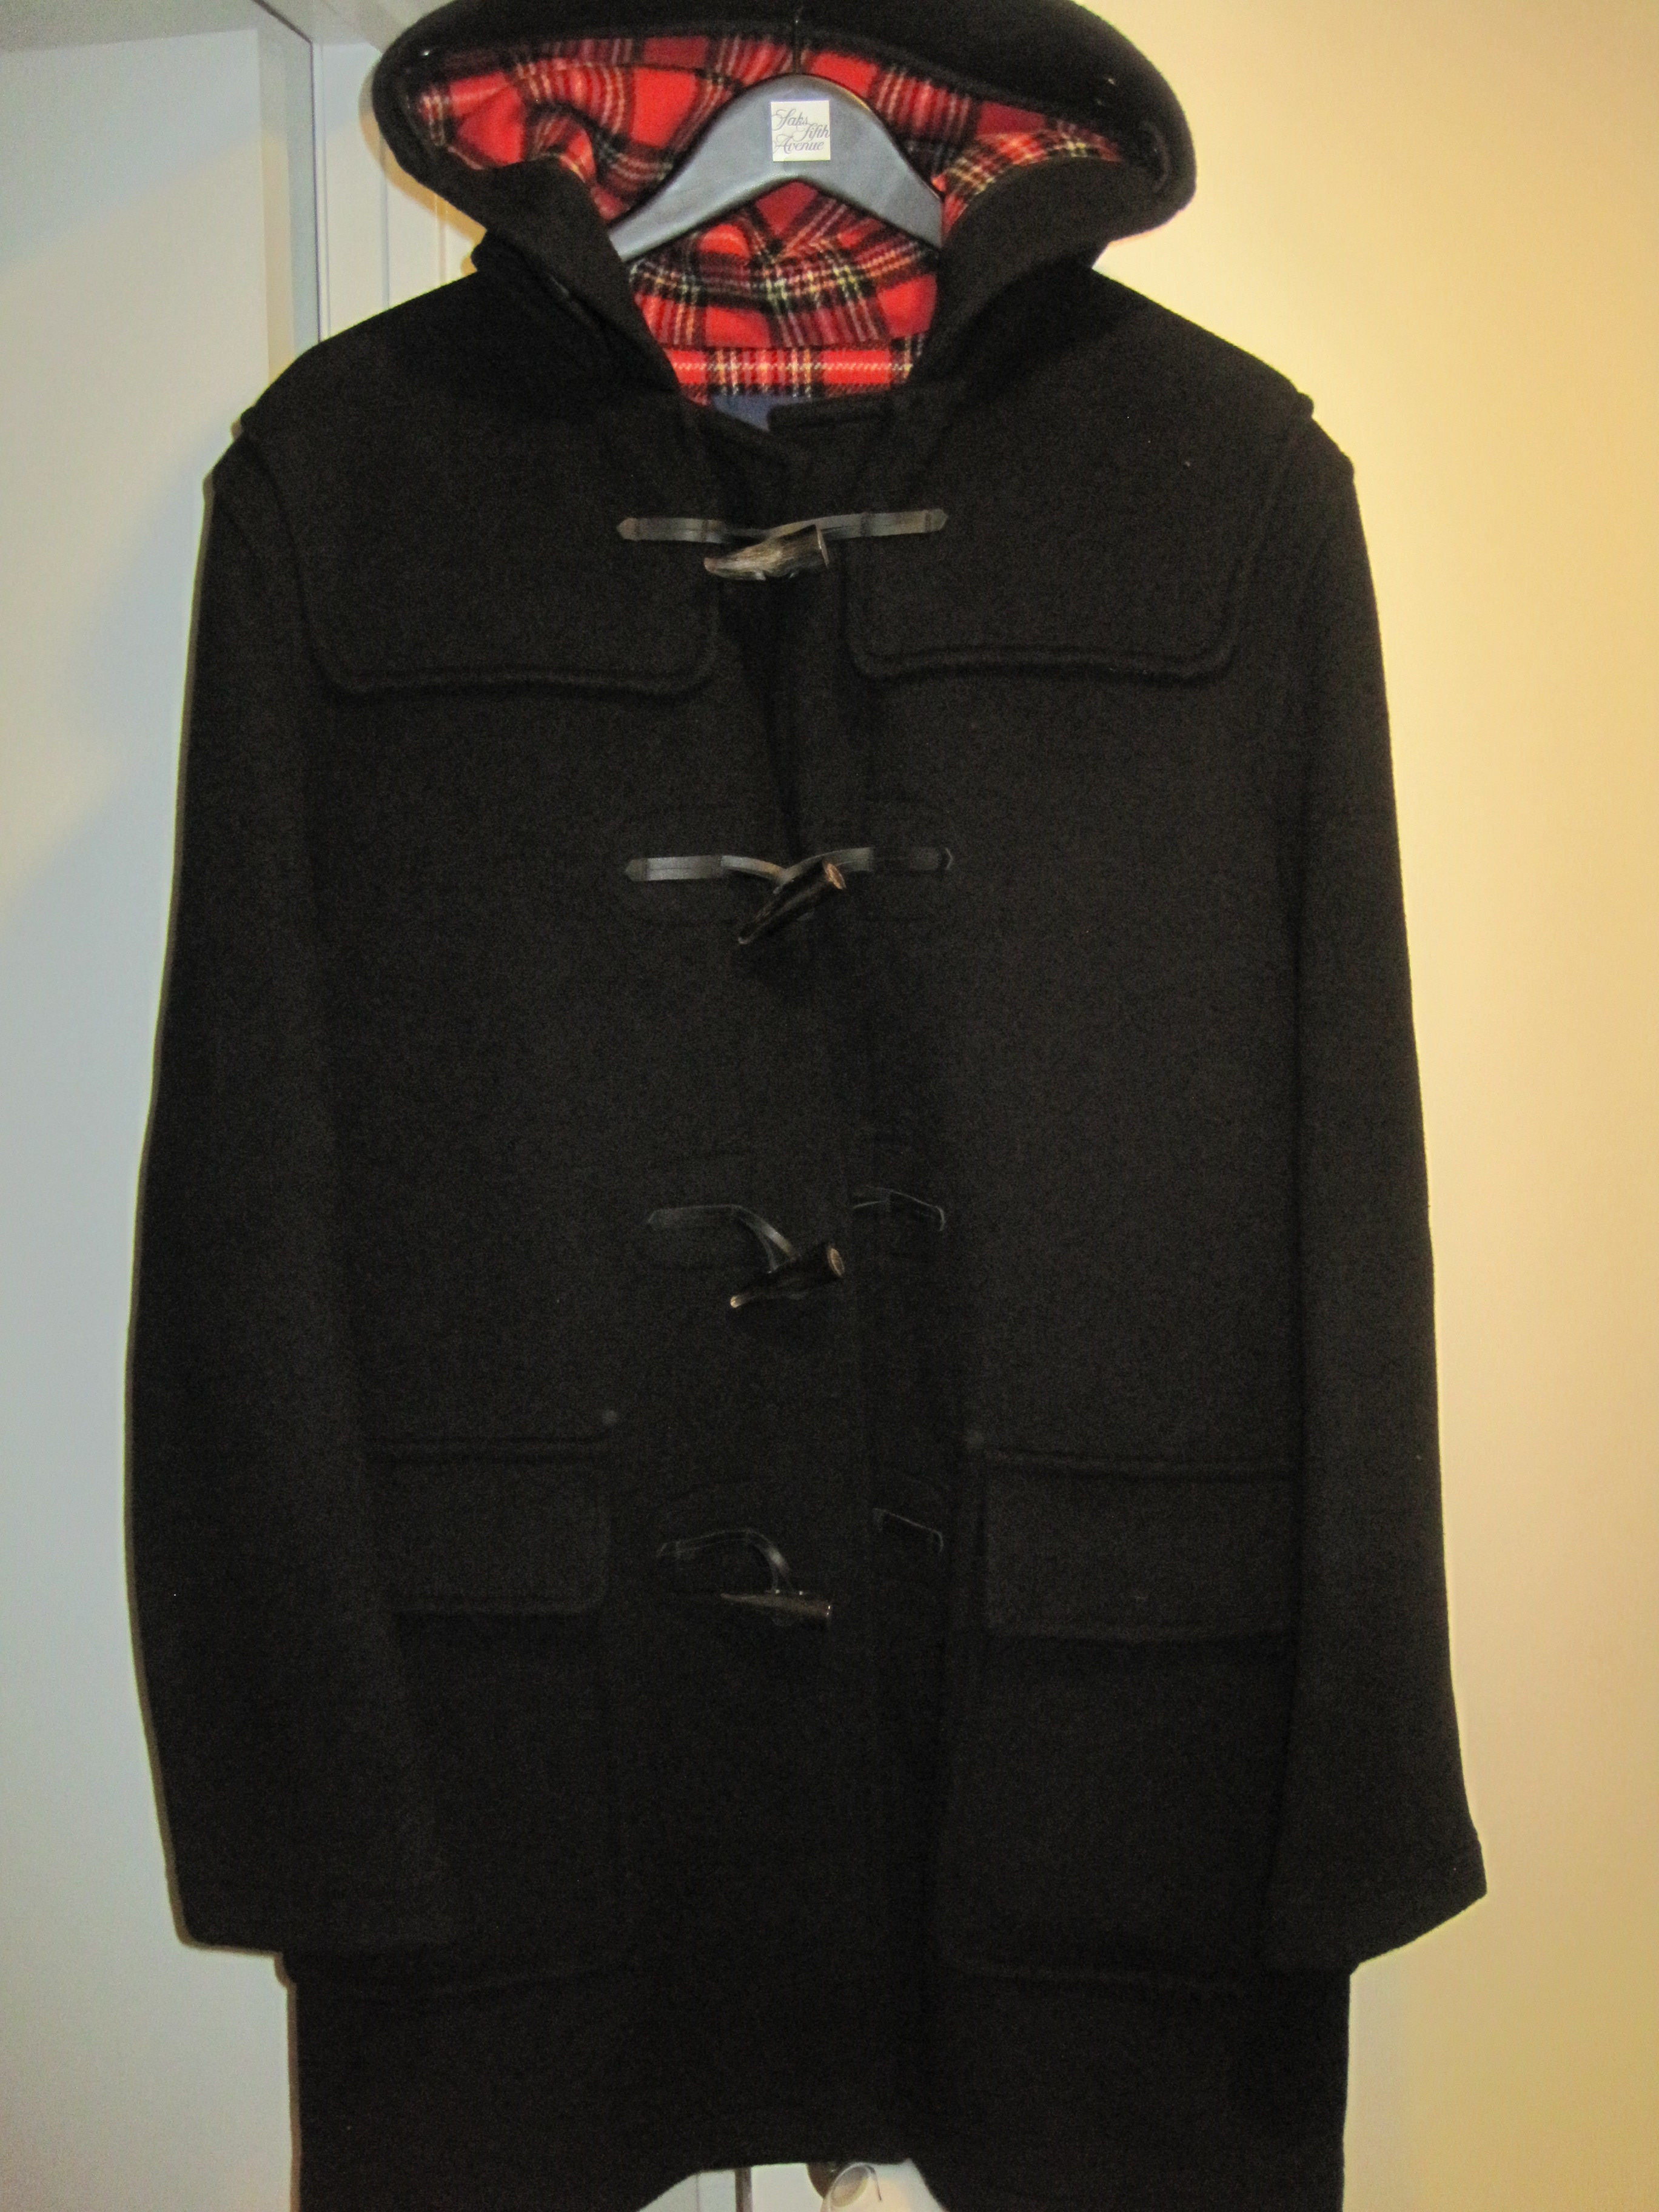 NWT Fred Perry x Gloverall Black Wool Duffle Coat Size 40 Made in